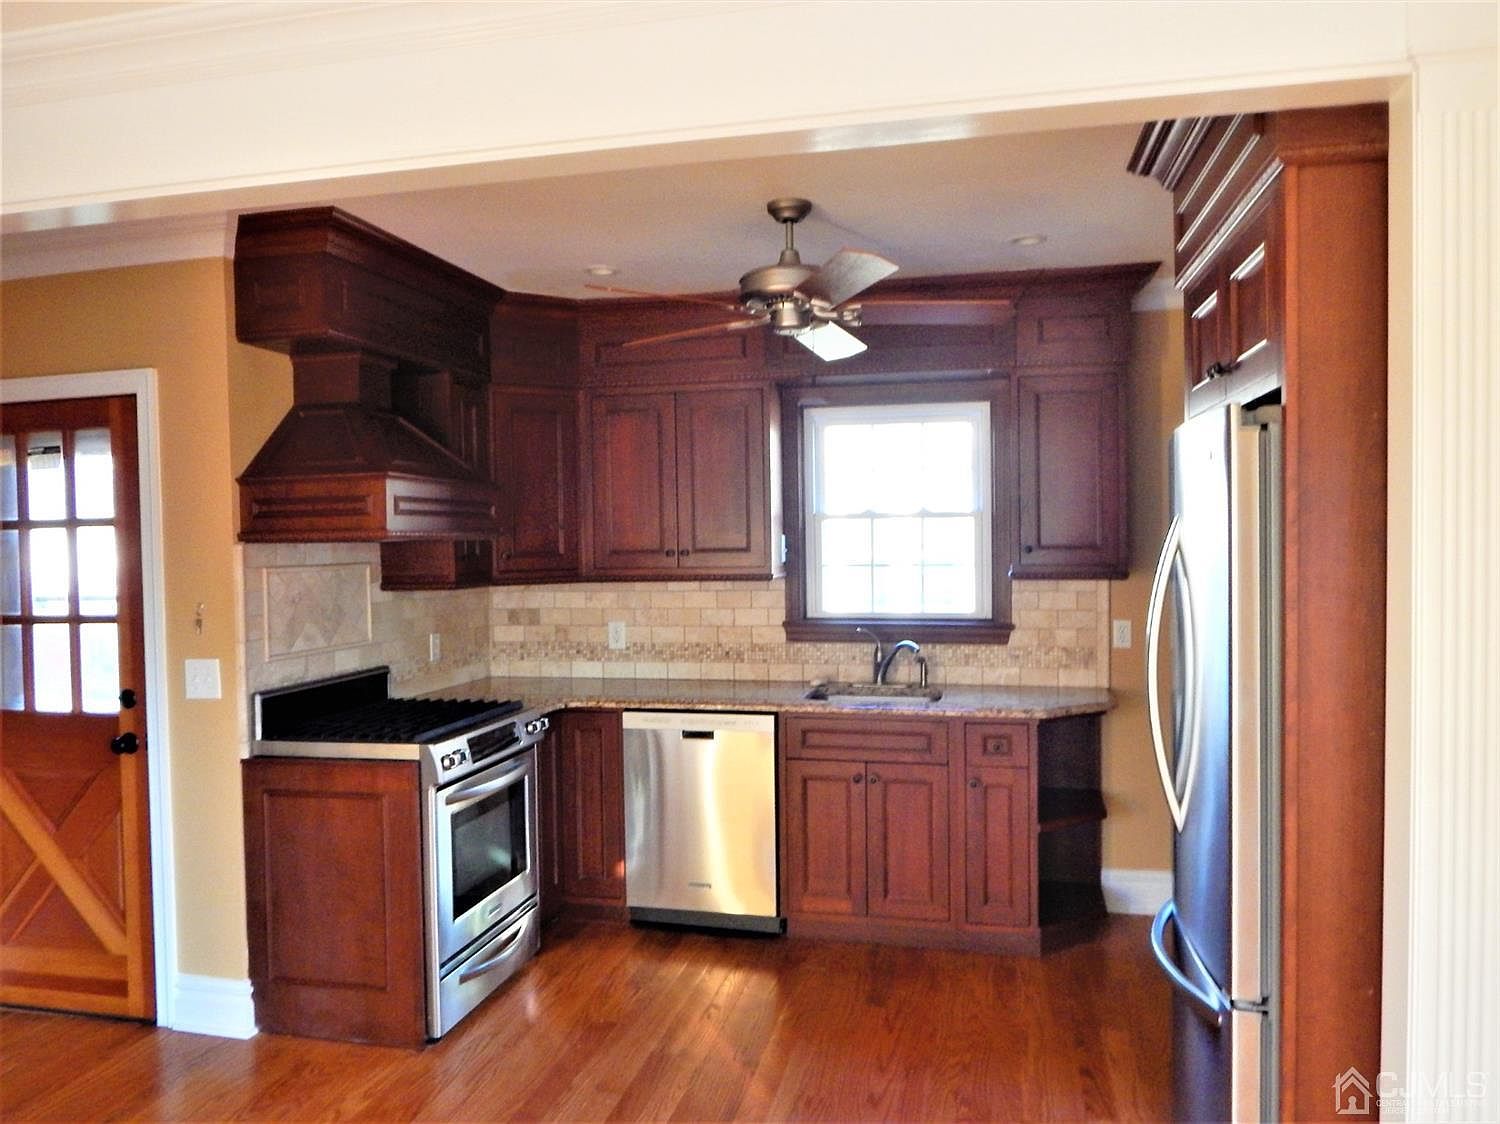 Kitchen Cabinets South Plainfield Nj / Brook Cabinetry By Anthony